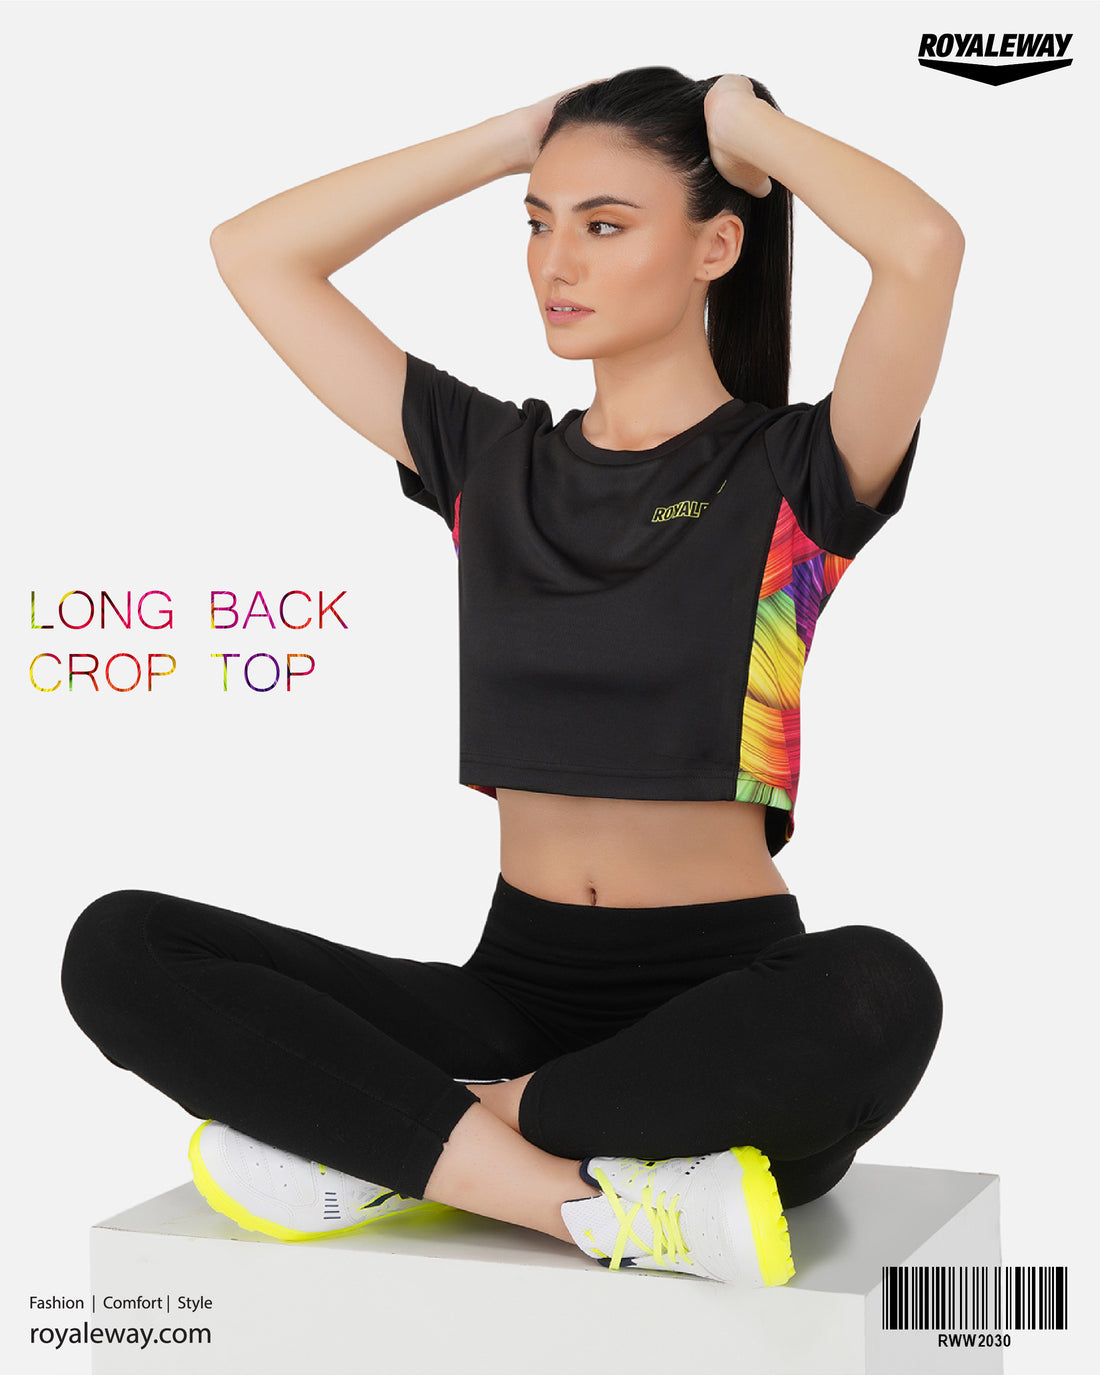 LONG BACK CROP TOP WOMEN BLACK AND MULTI COLOR RWW2030